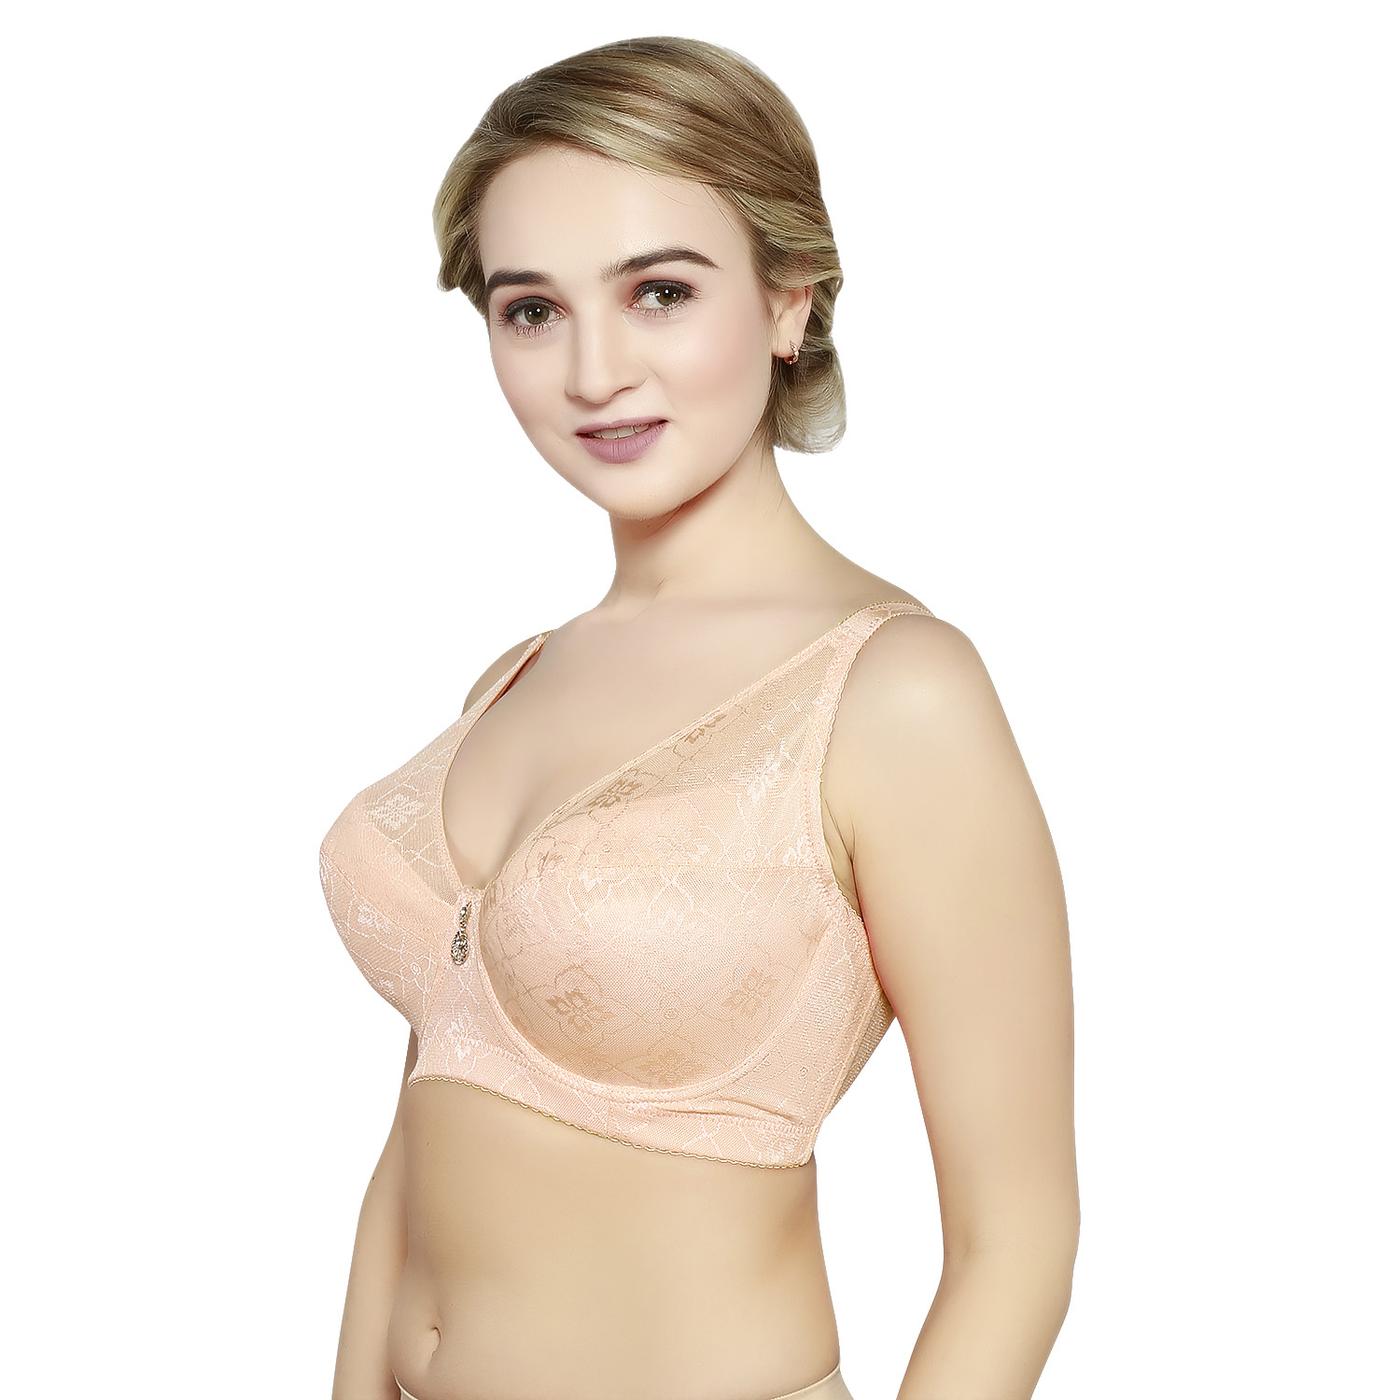 Size 44 Full Cup Bras, Size 44 Full Coverage Bras